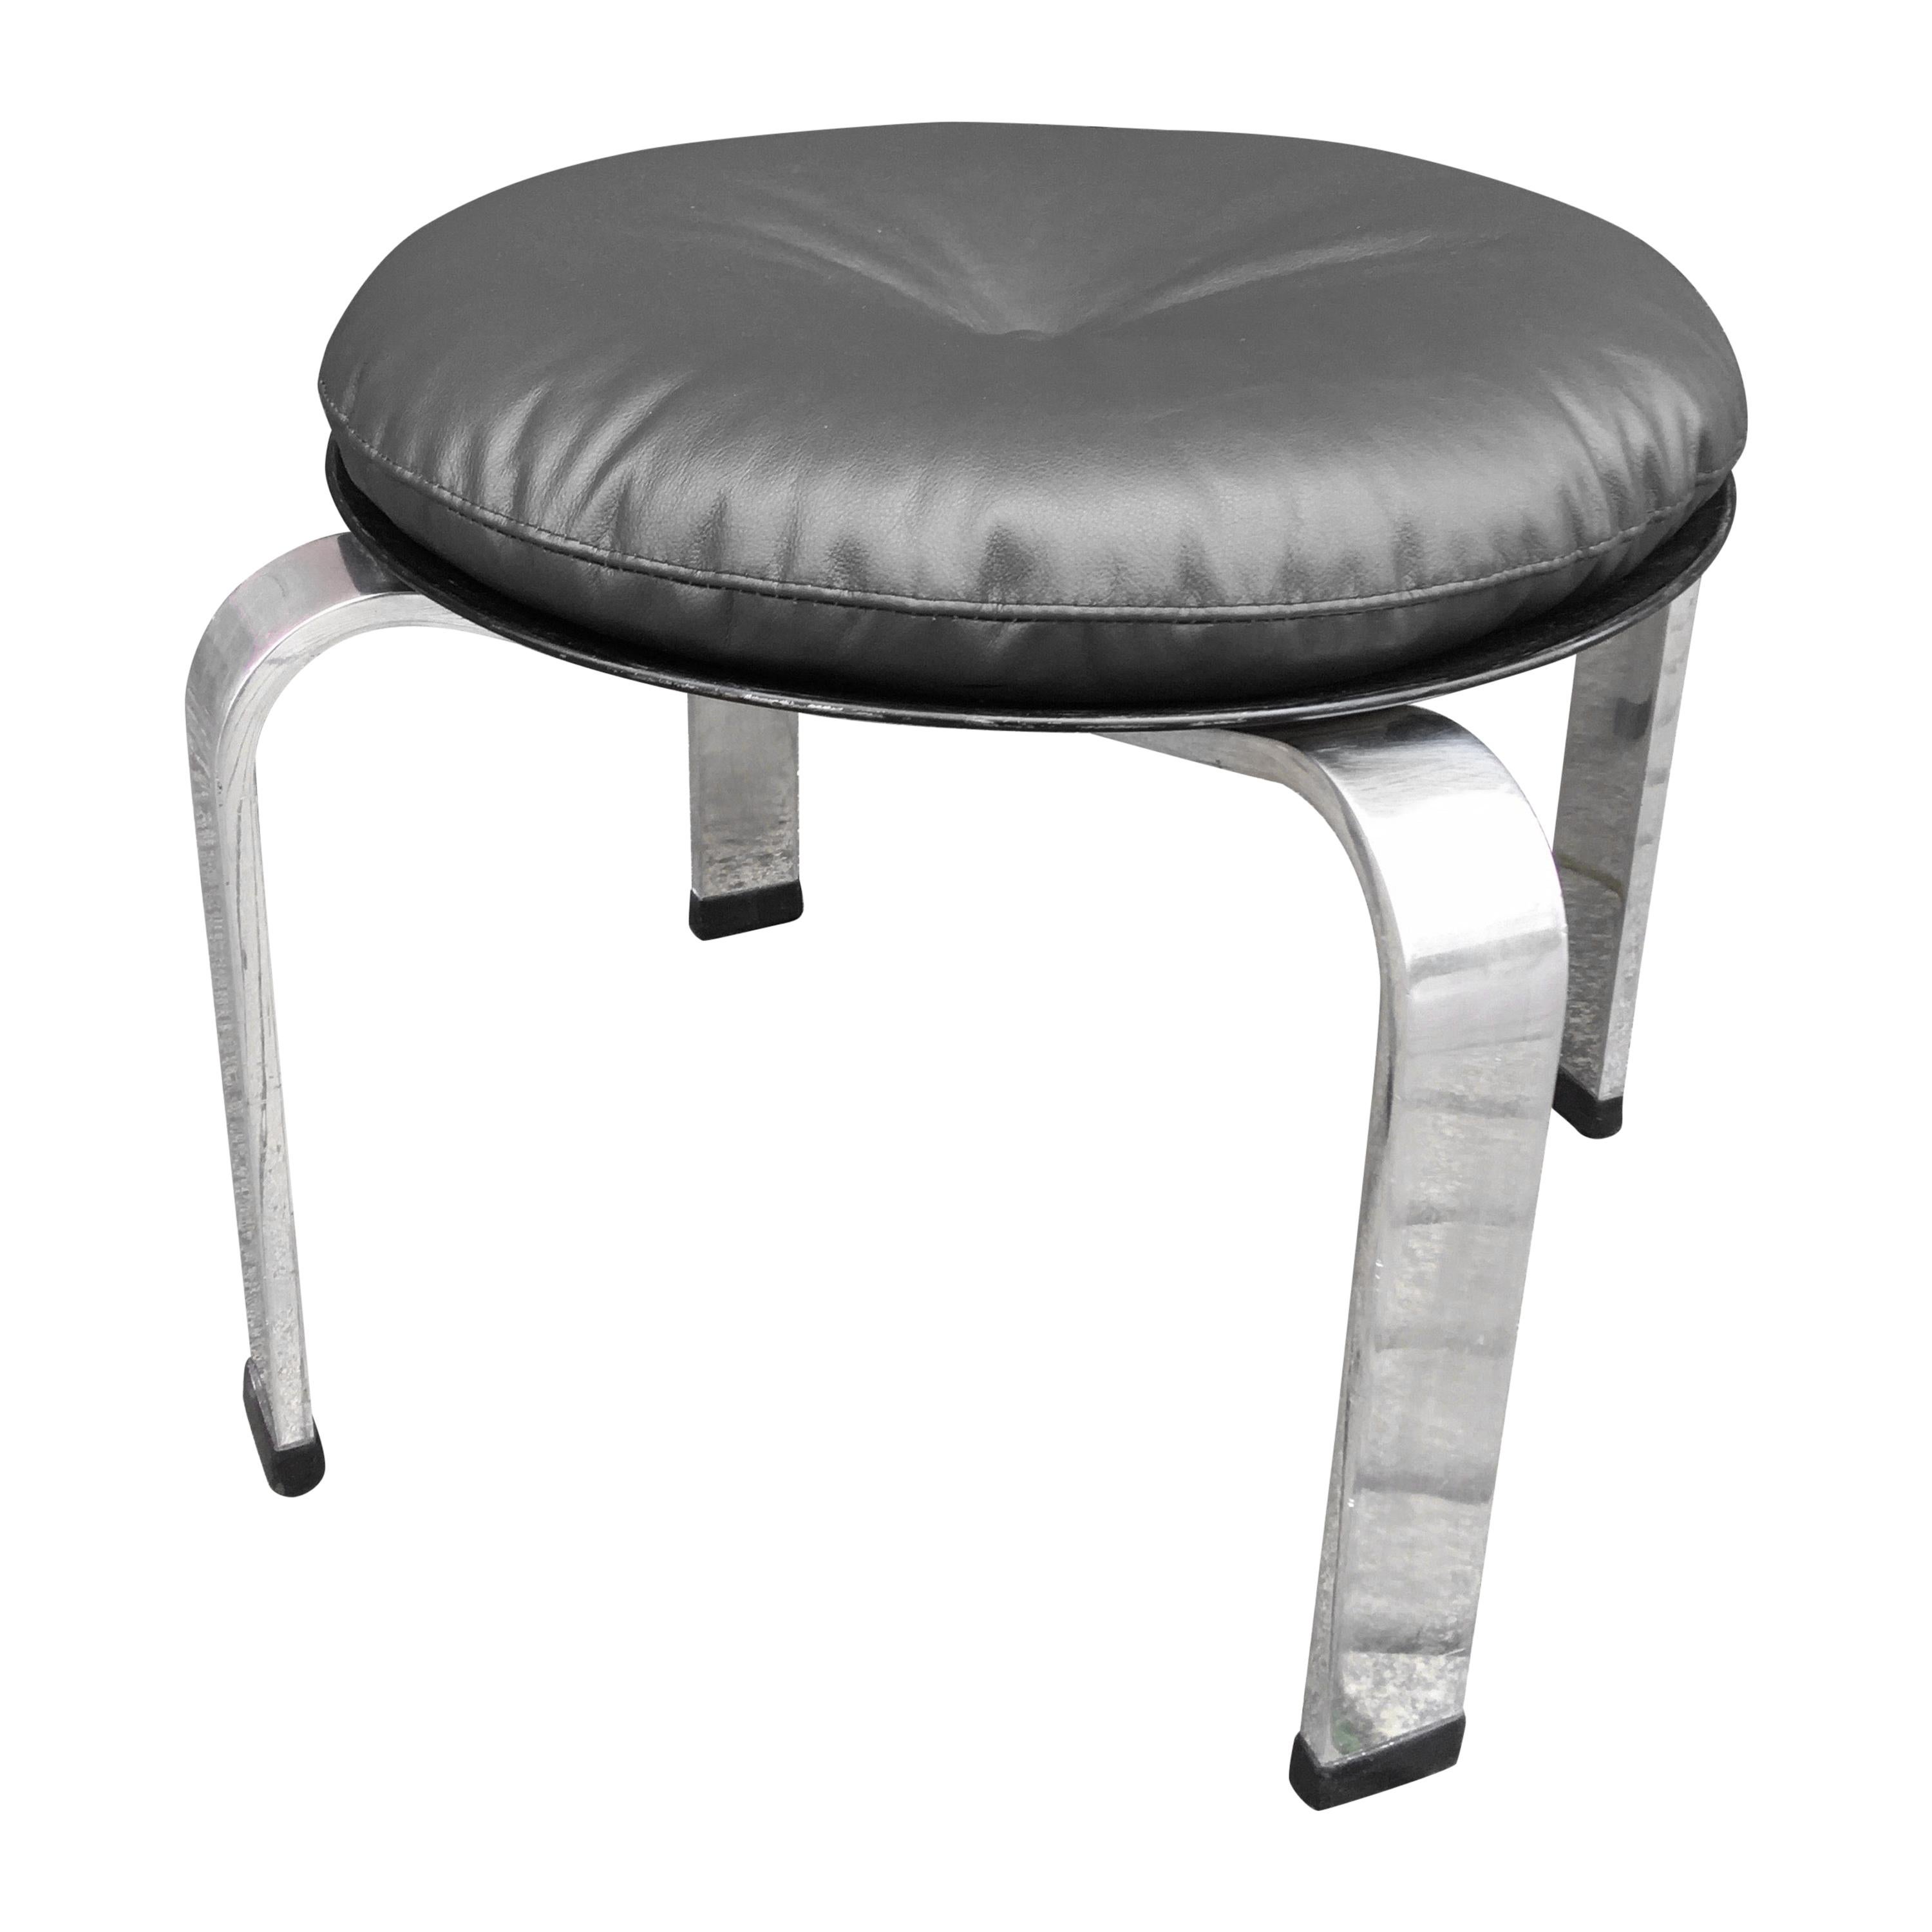 Poul Kjaerhorm Style Stainless and Leather Ottoman/ Stool